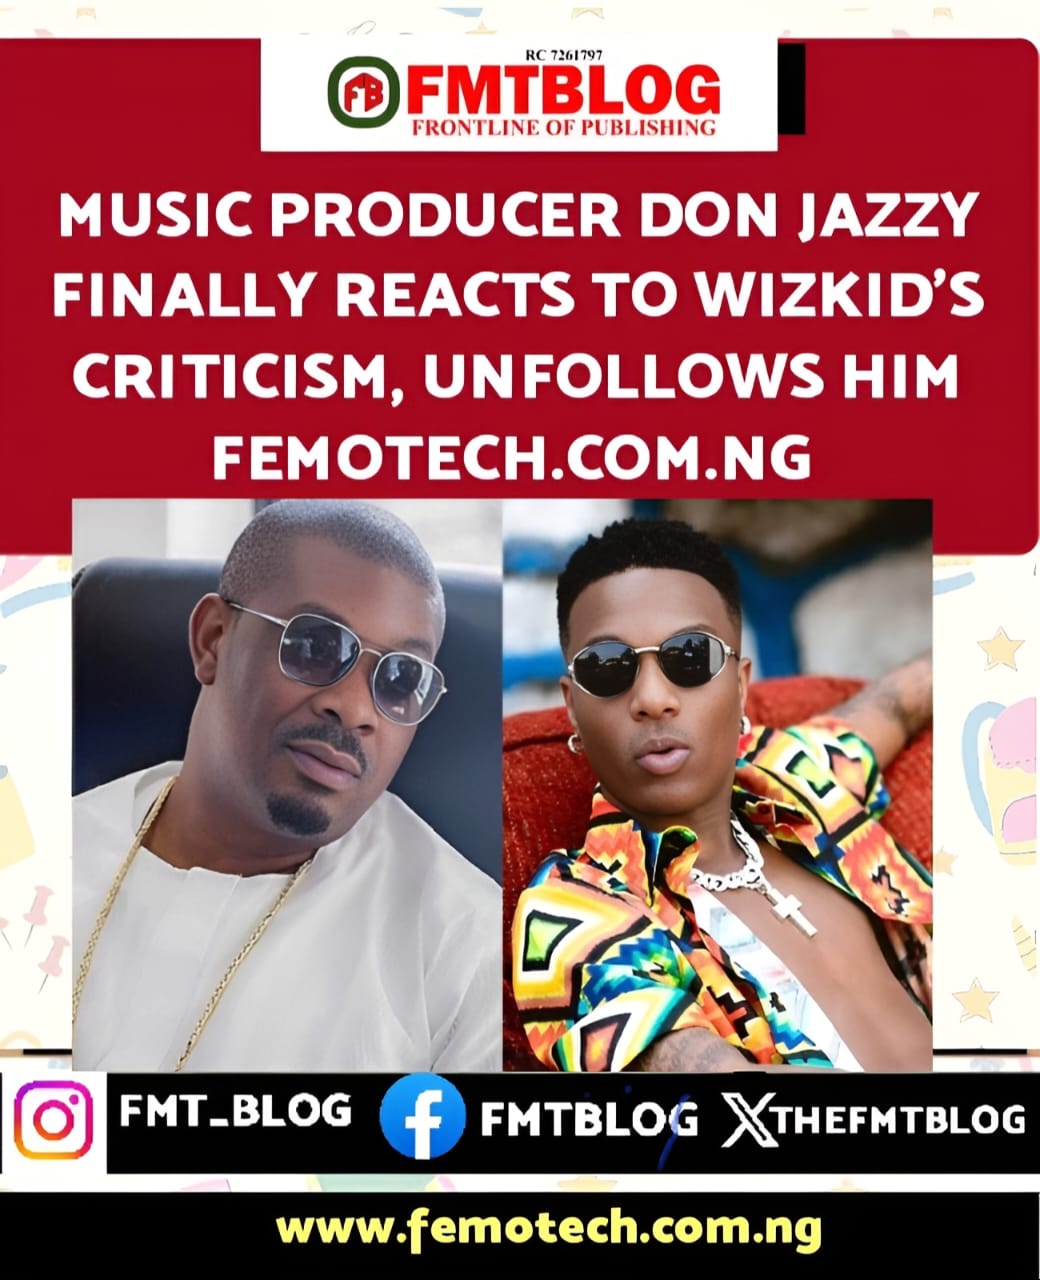 Music Producer Don Jazzy Finally Reacts To Wizkid’s Criticism, Unfollows Him